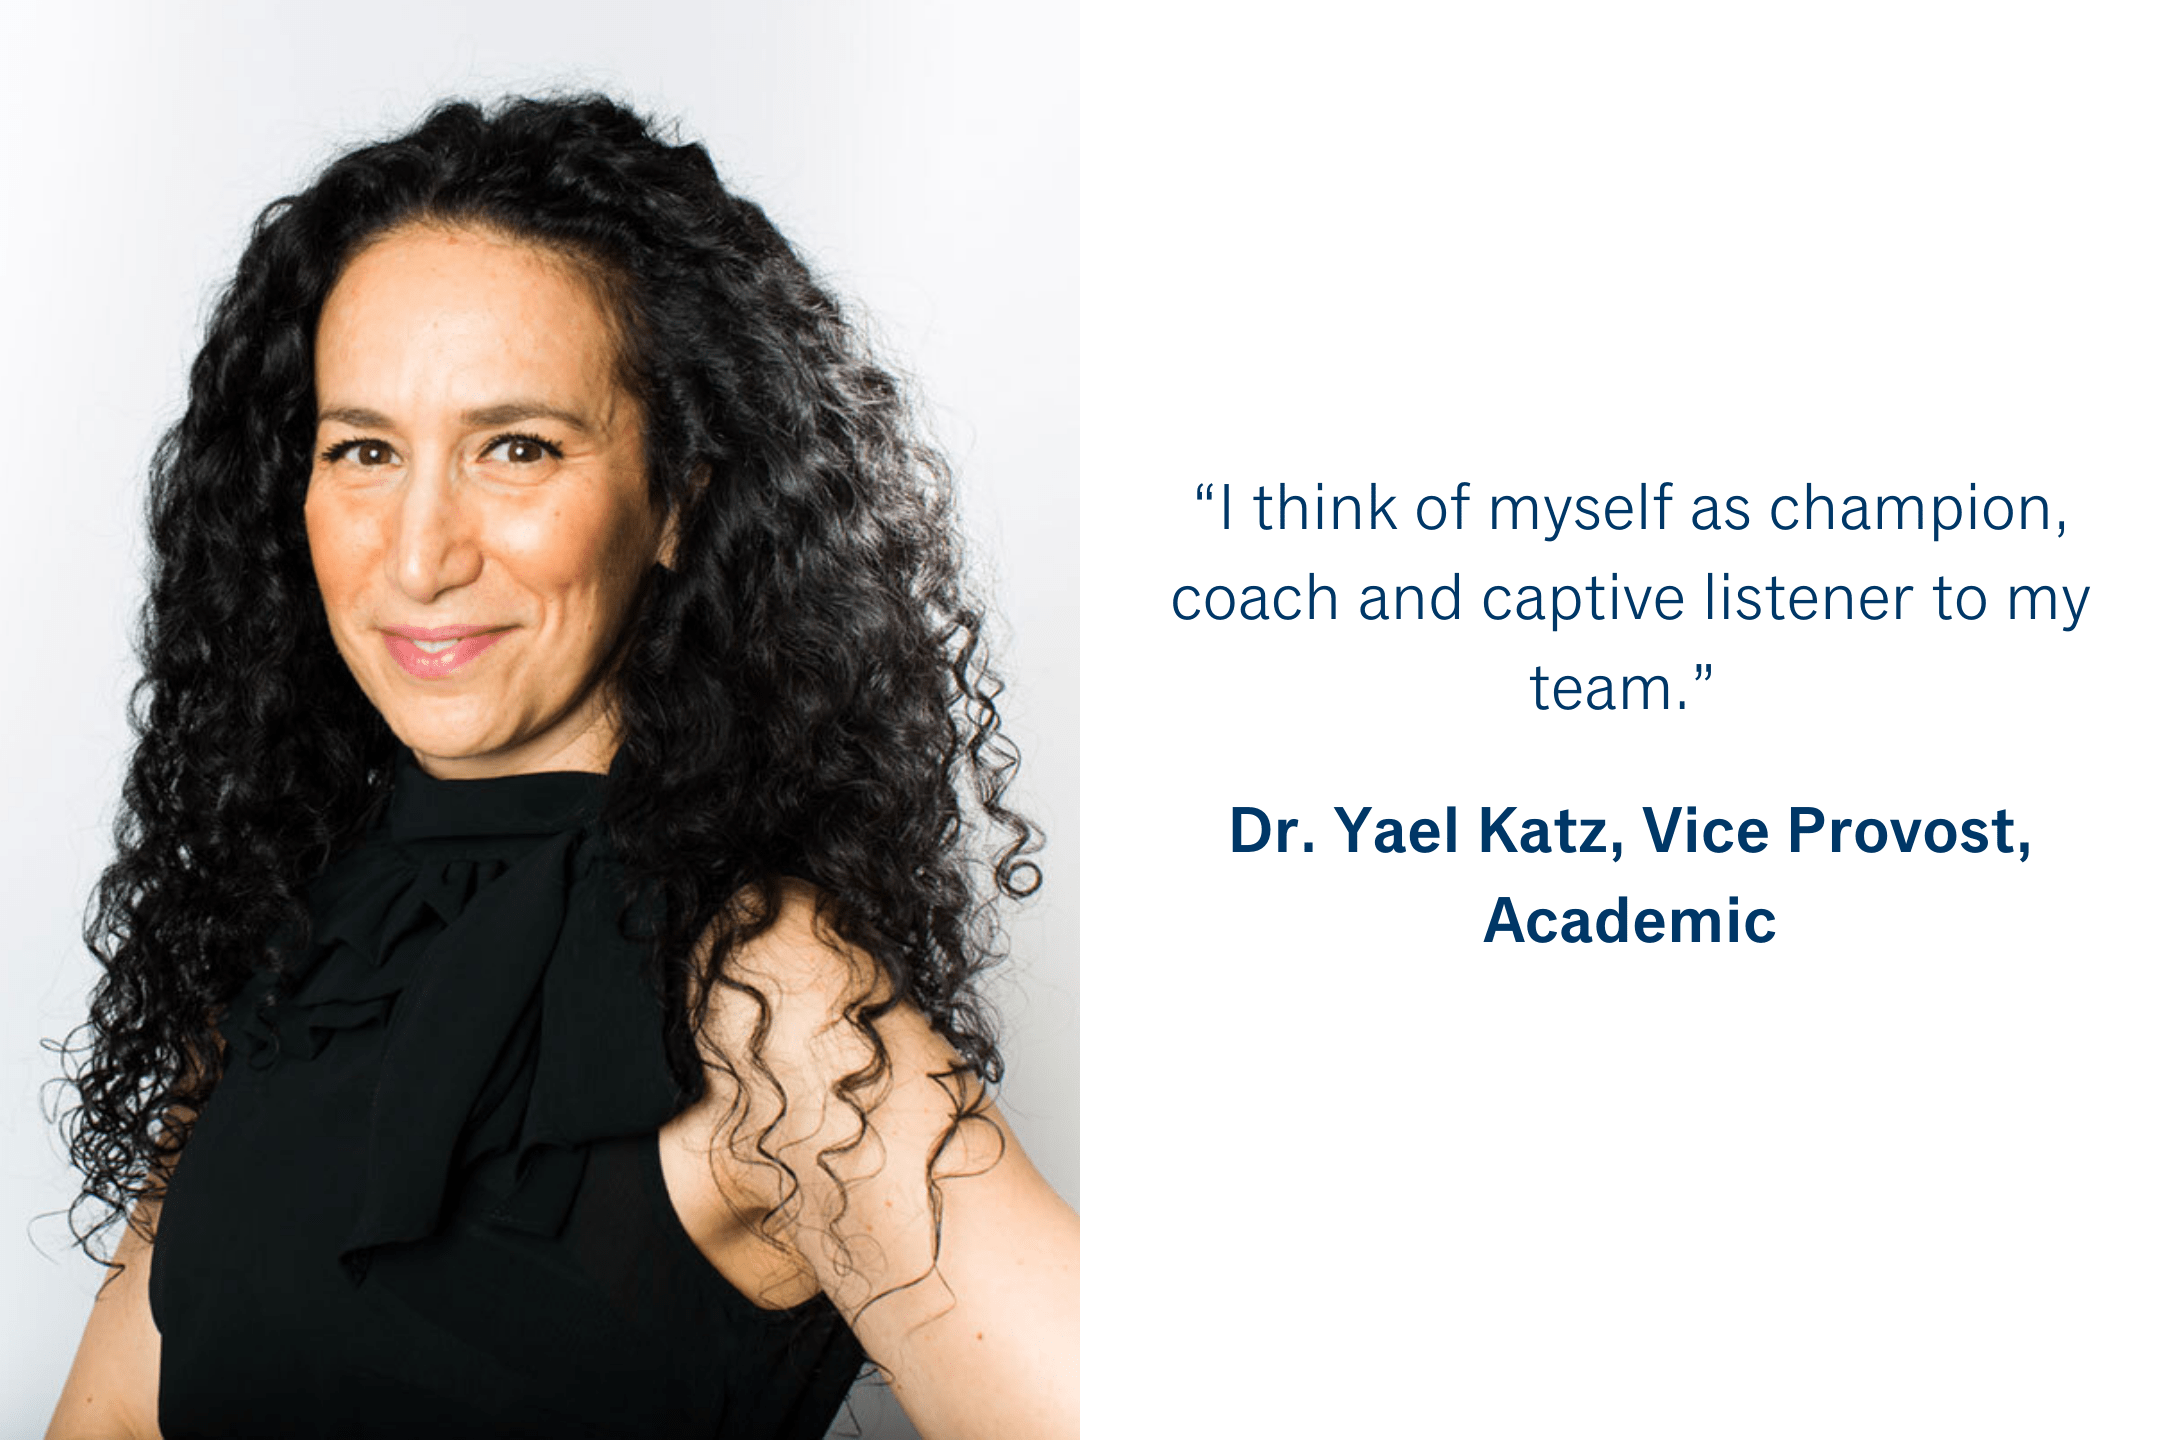 “I think of myself as champion, coach and captive listener to my team.”  Dr. Yael Katz, Vice Provost, Academic